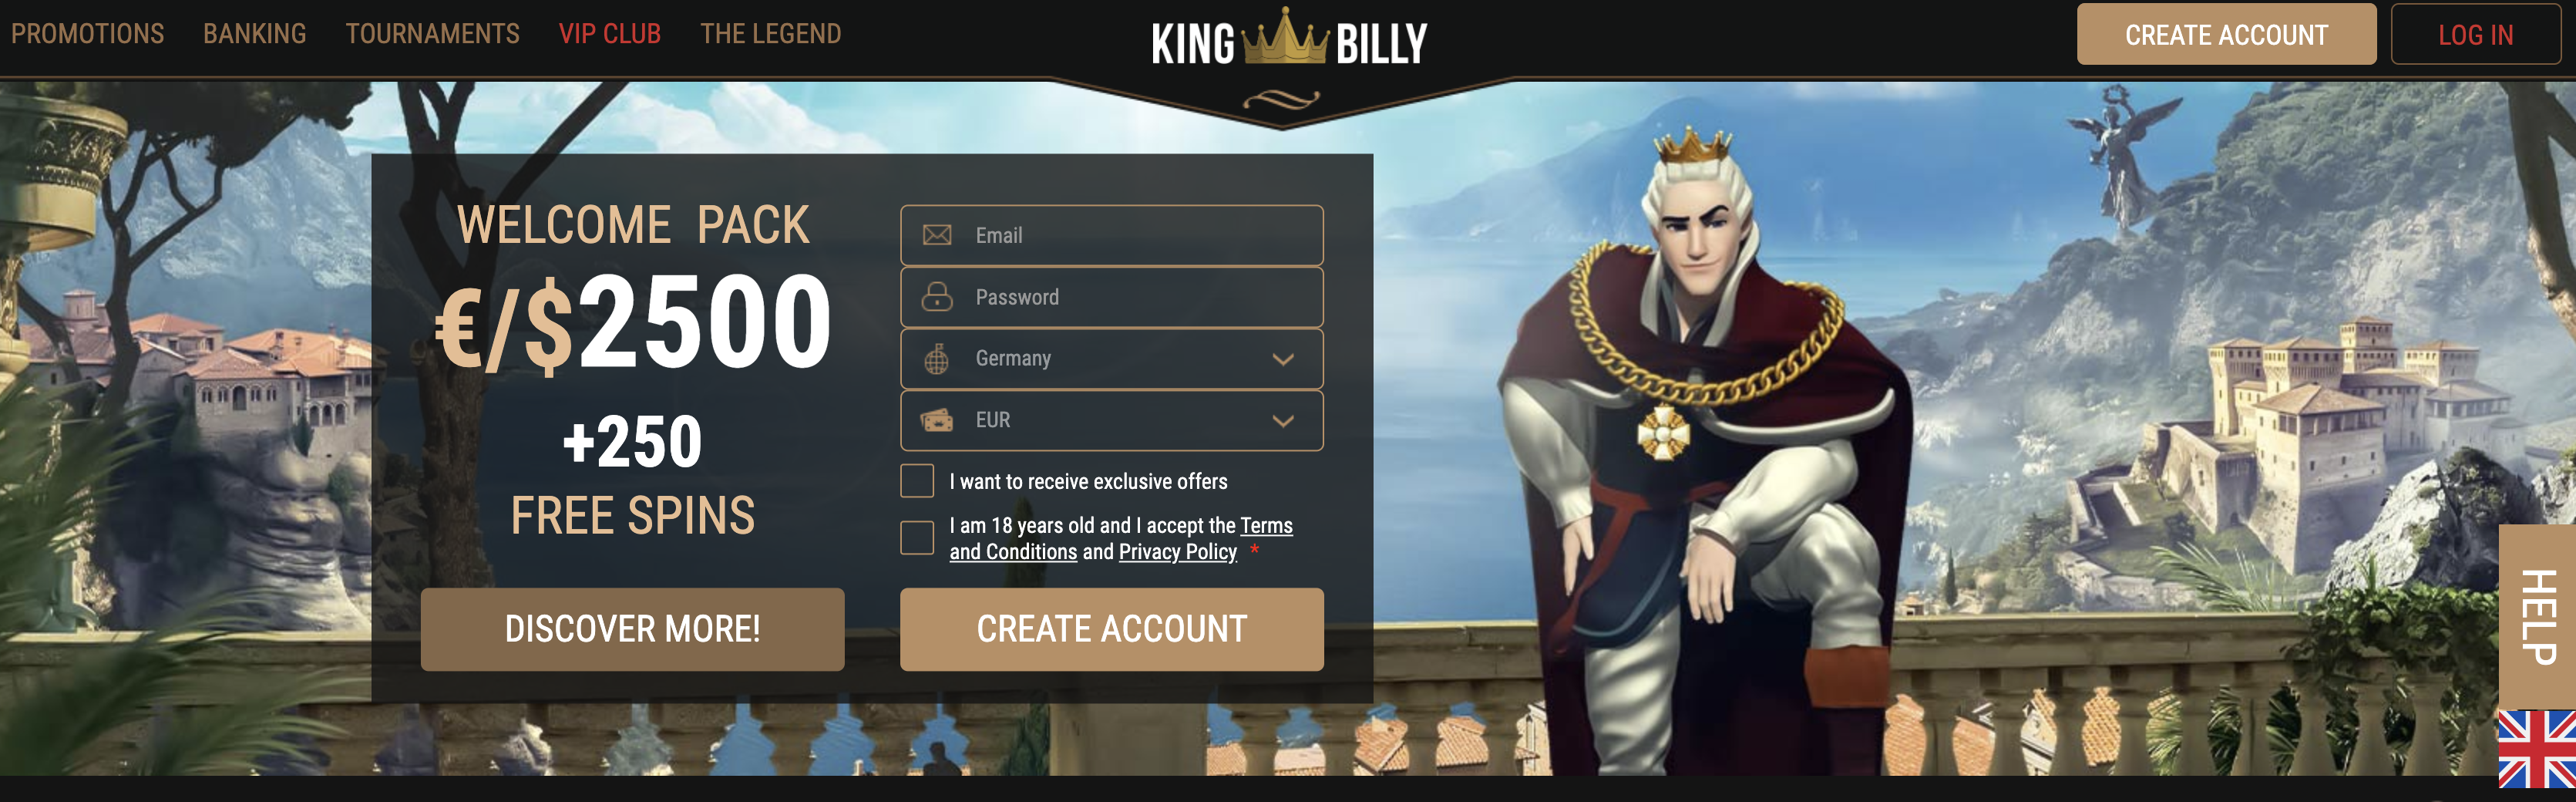 KingBilly Overview